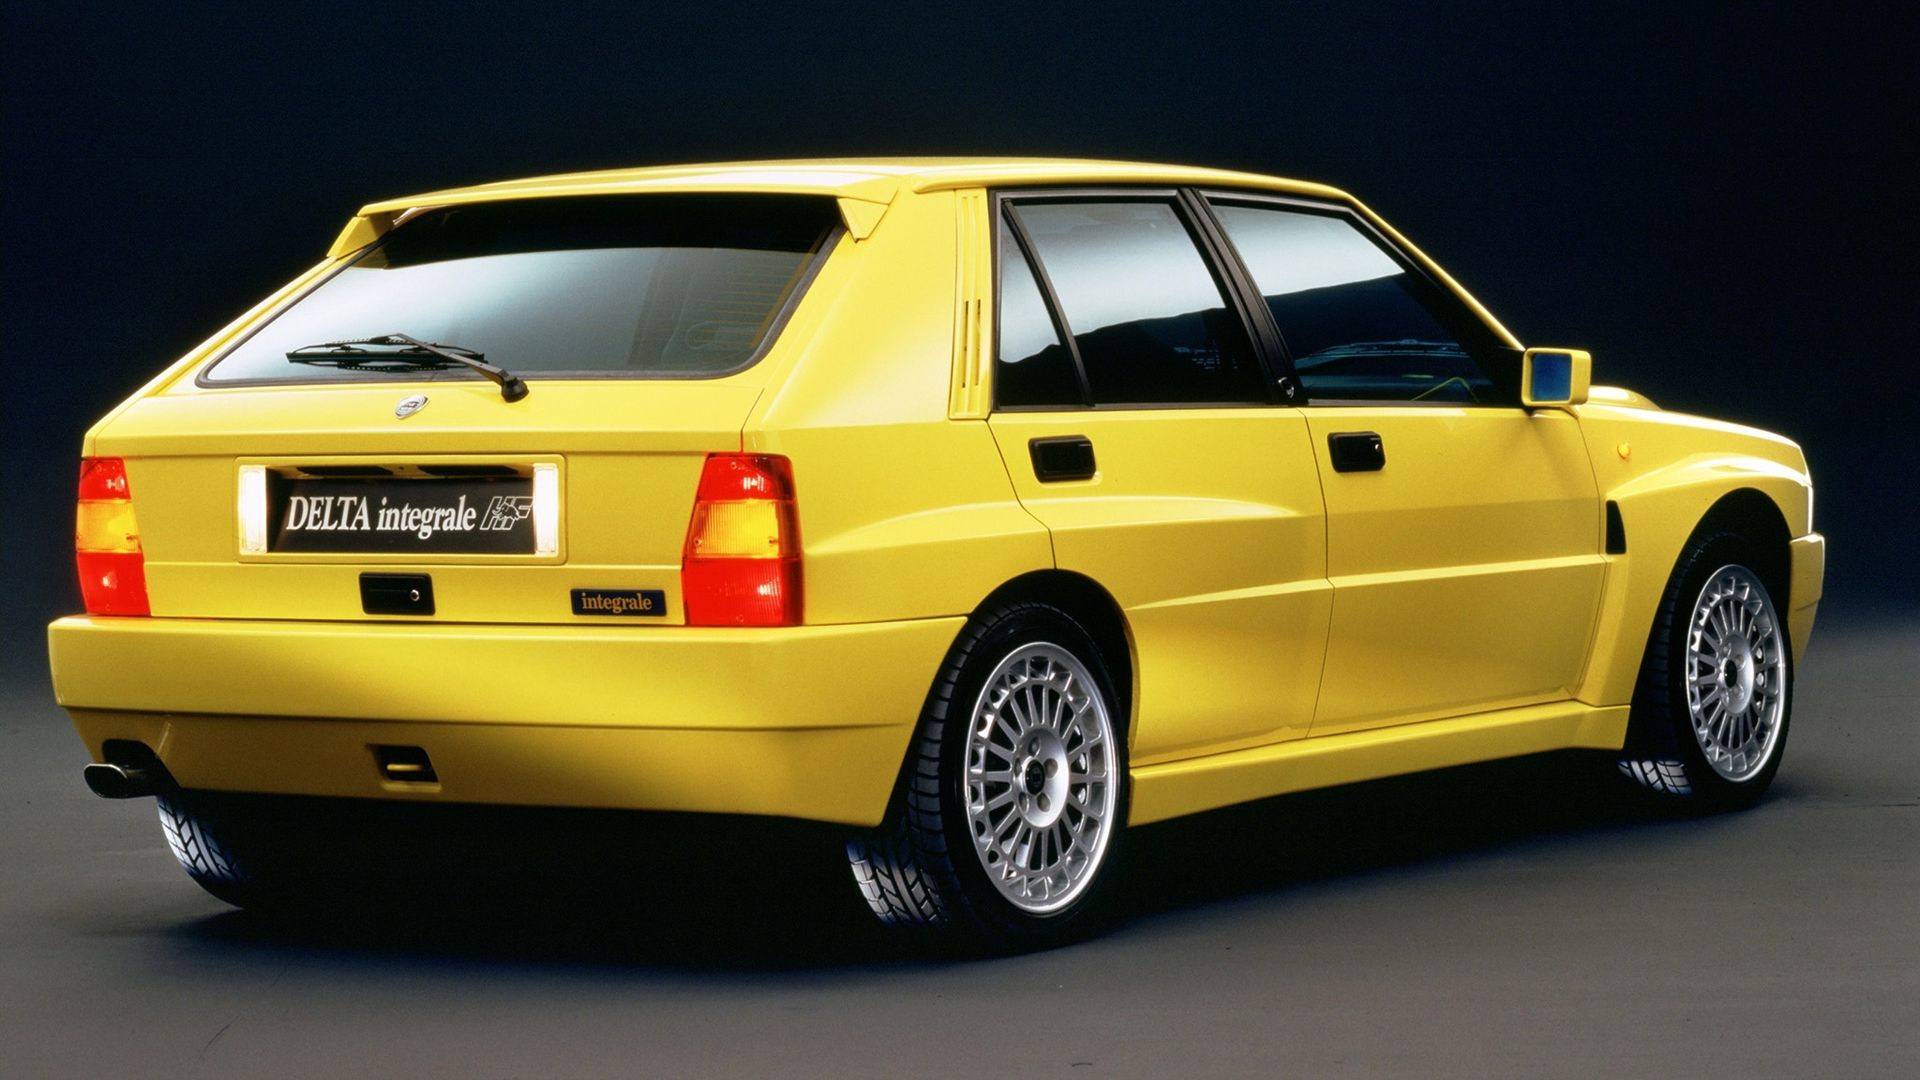 The rear of the Delta HF Integrale